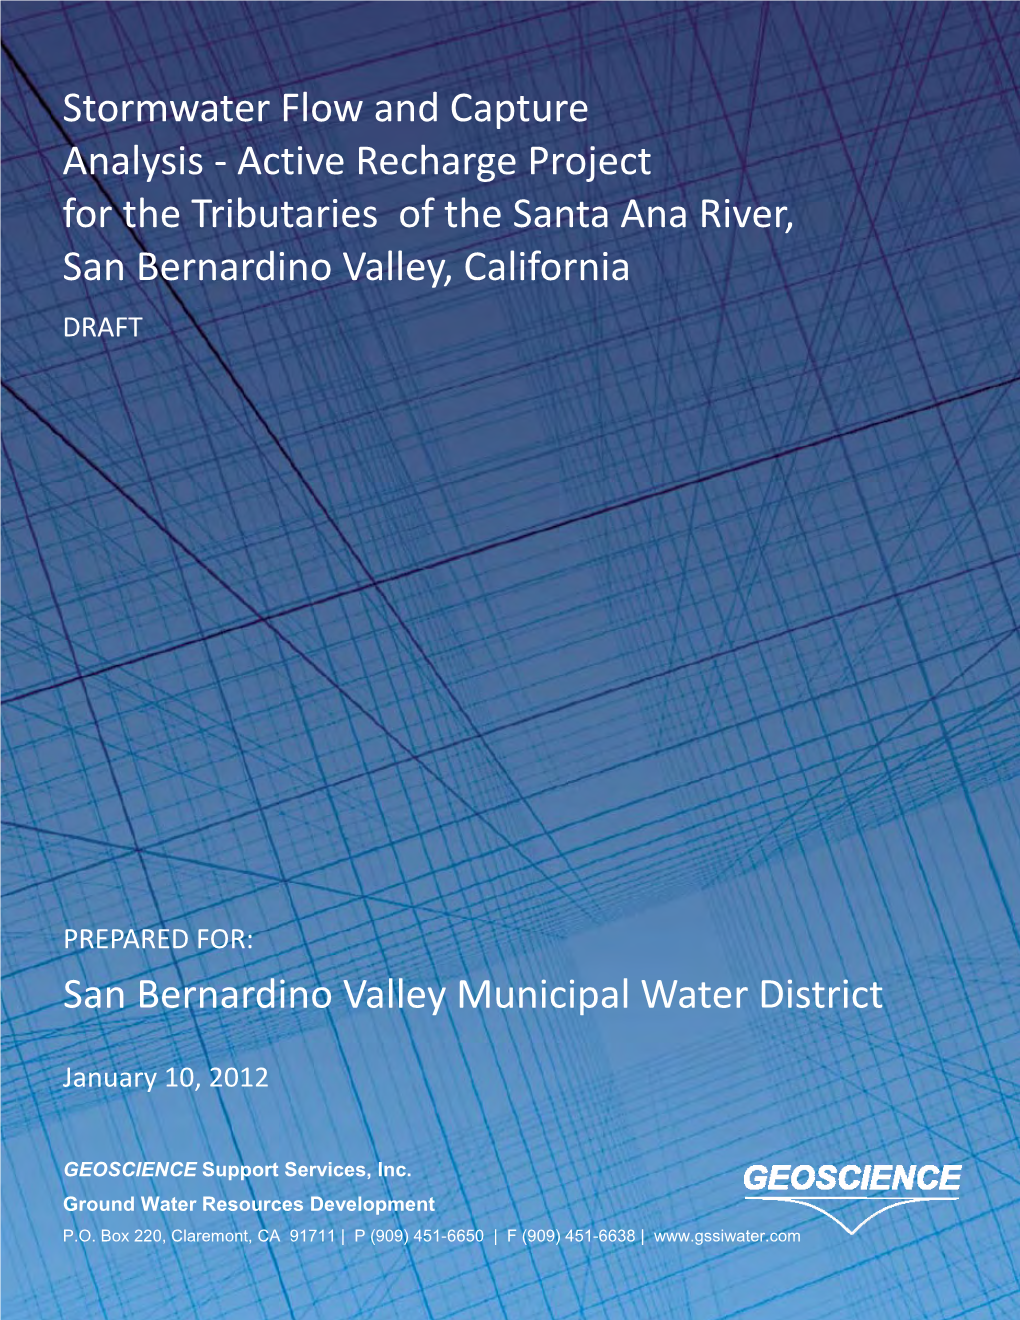 Active Recharge Project for the Tributaries of the Santa Ana River, San Bernardino Valley, California